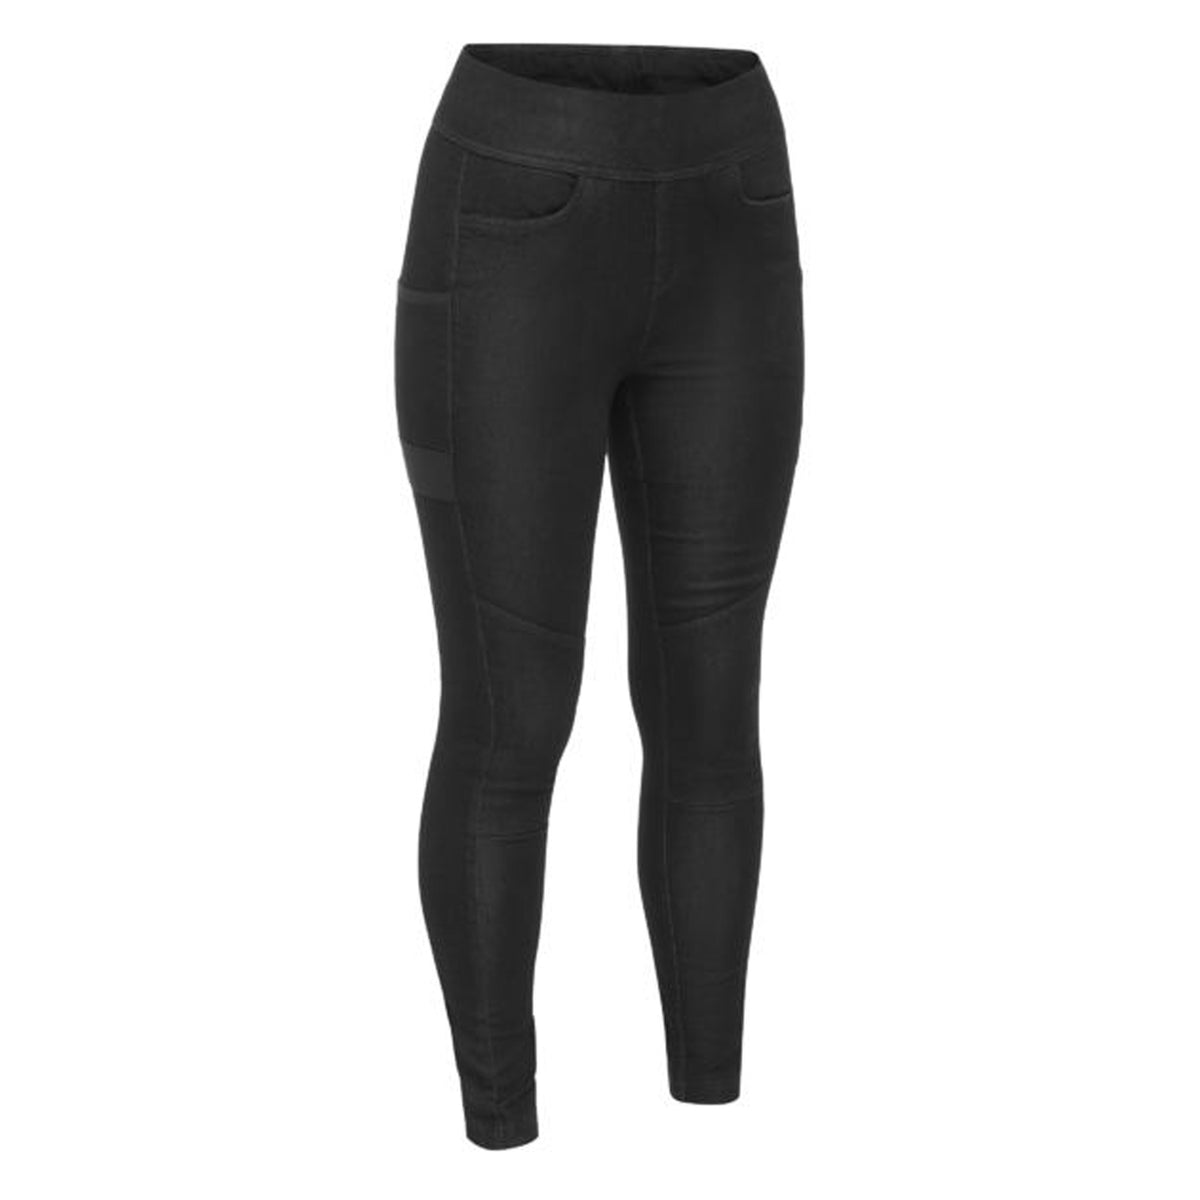 bisley womens flx and move jegging in black